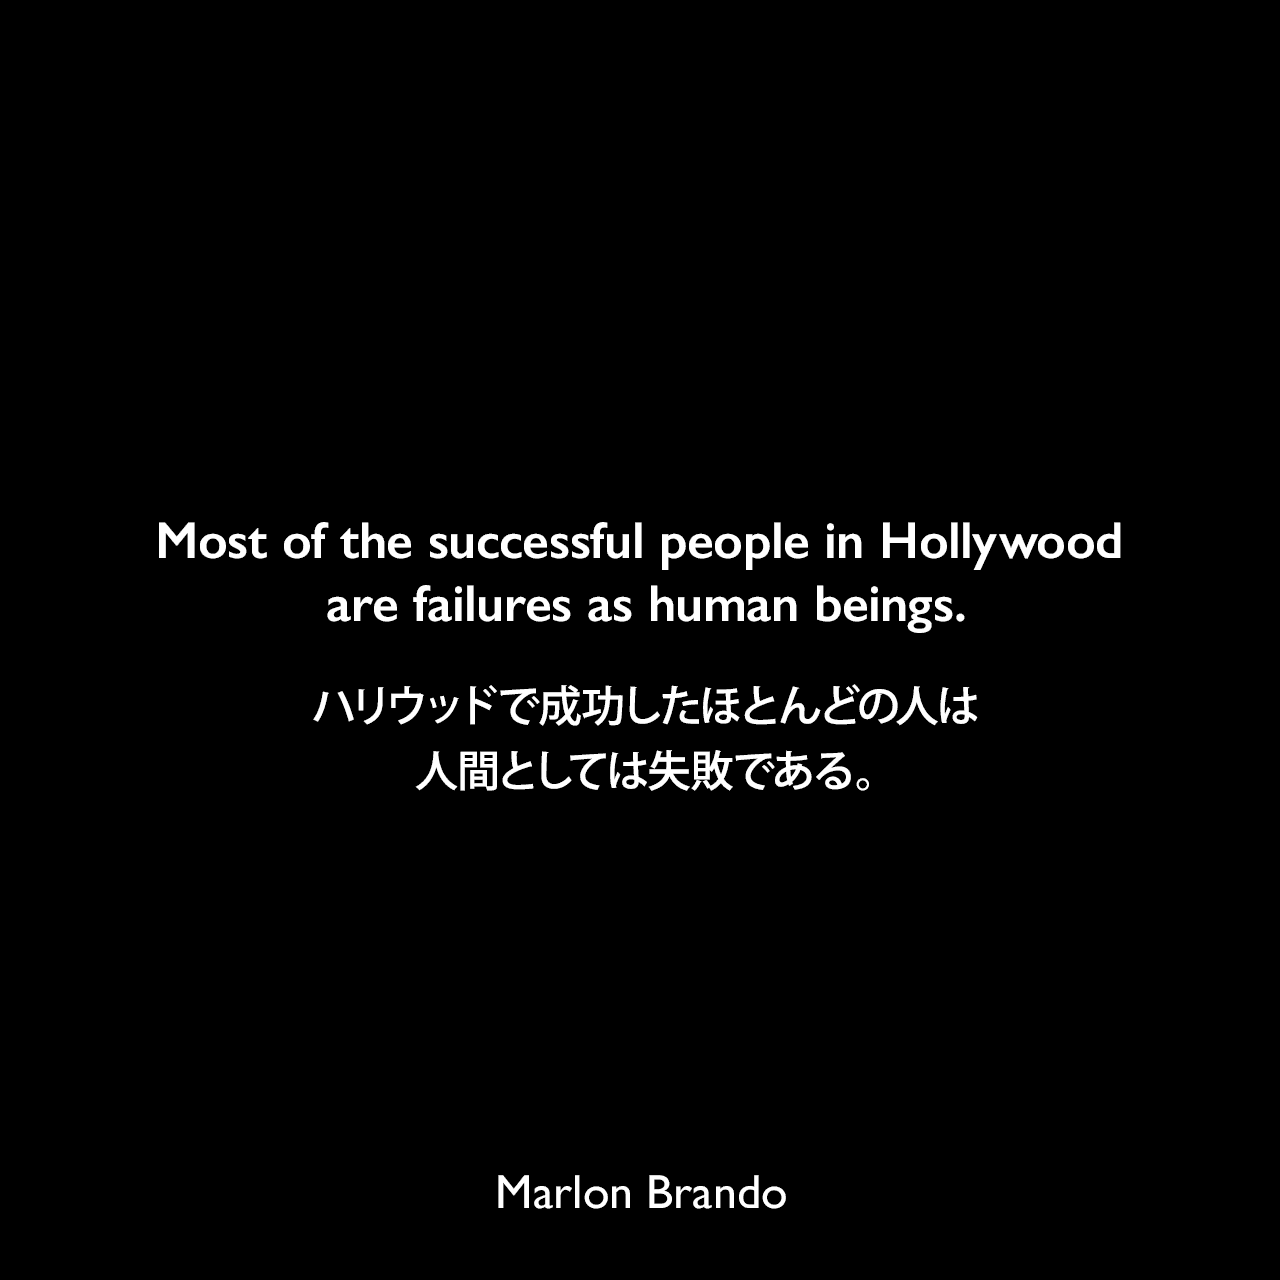 Most of the successful people in Hollywood are failures as human beings.ハリウッドで成功したほとんどの人は、人間としては失敗である。Marlon Brando